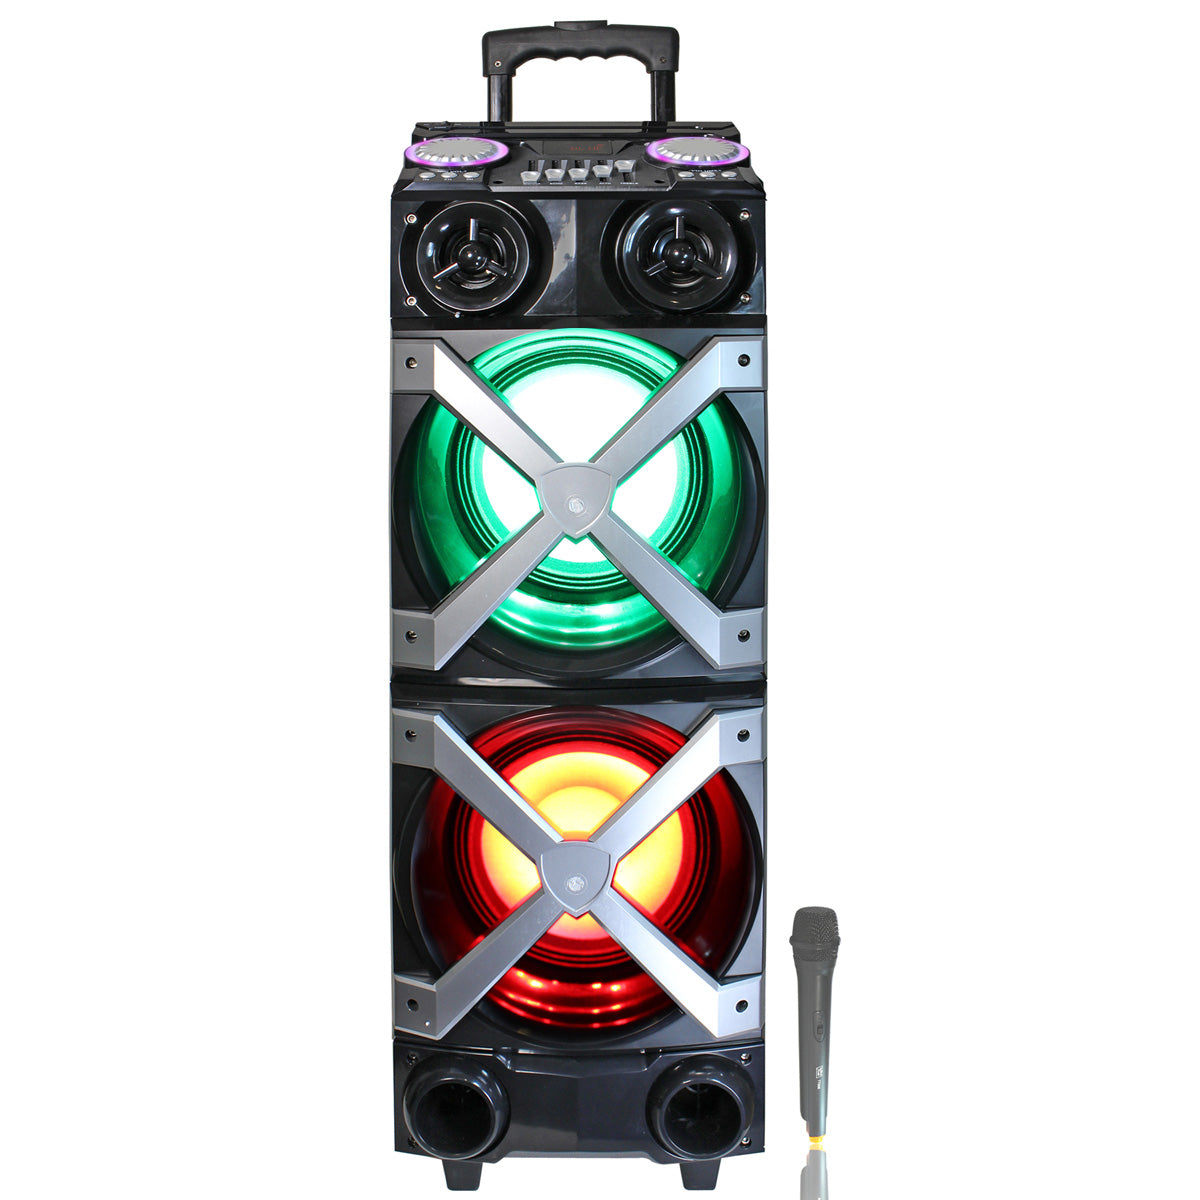 Fully Amplified Portable 3000 watts Peak Power Double 8” Speaker with DISCO BALL